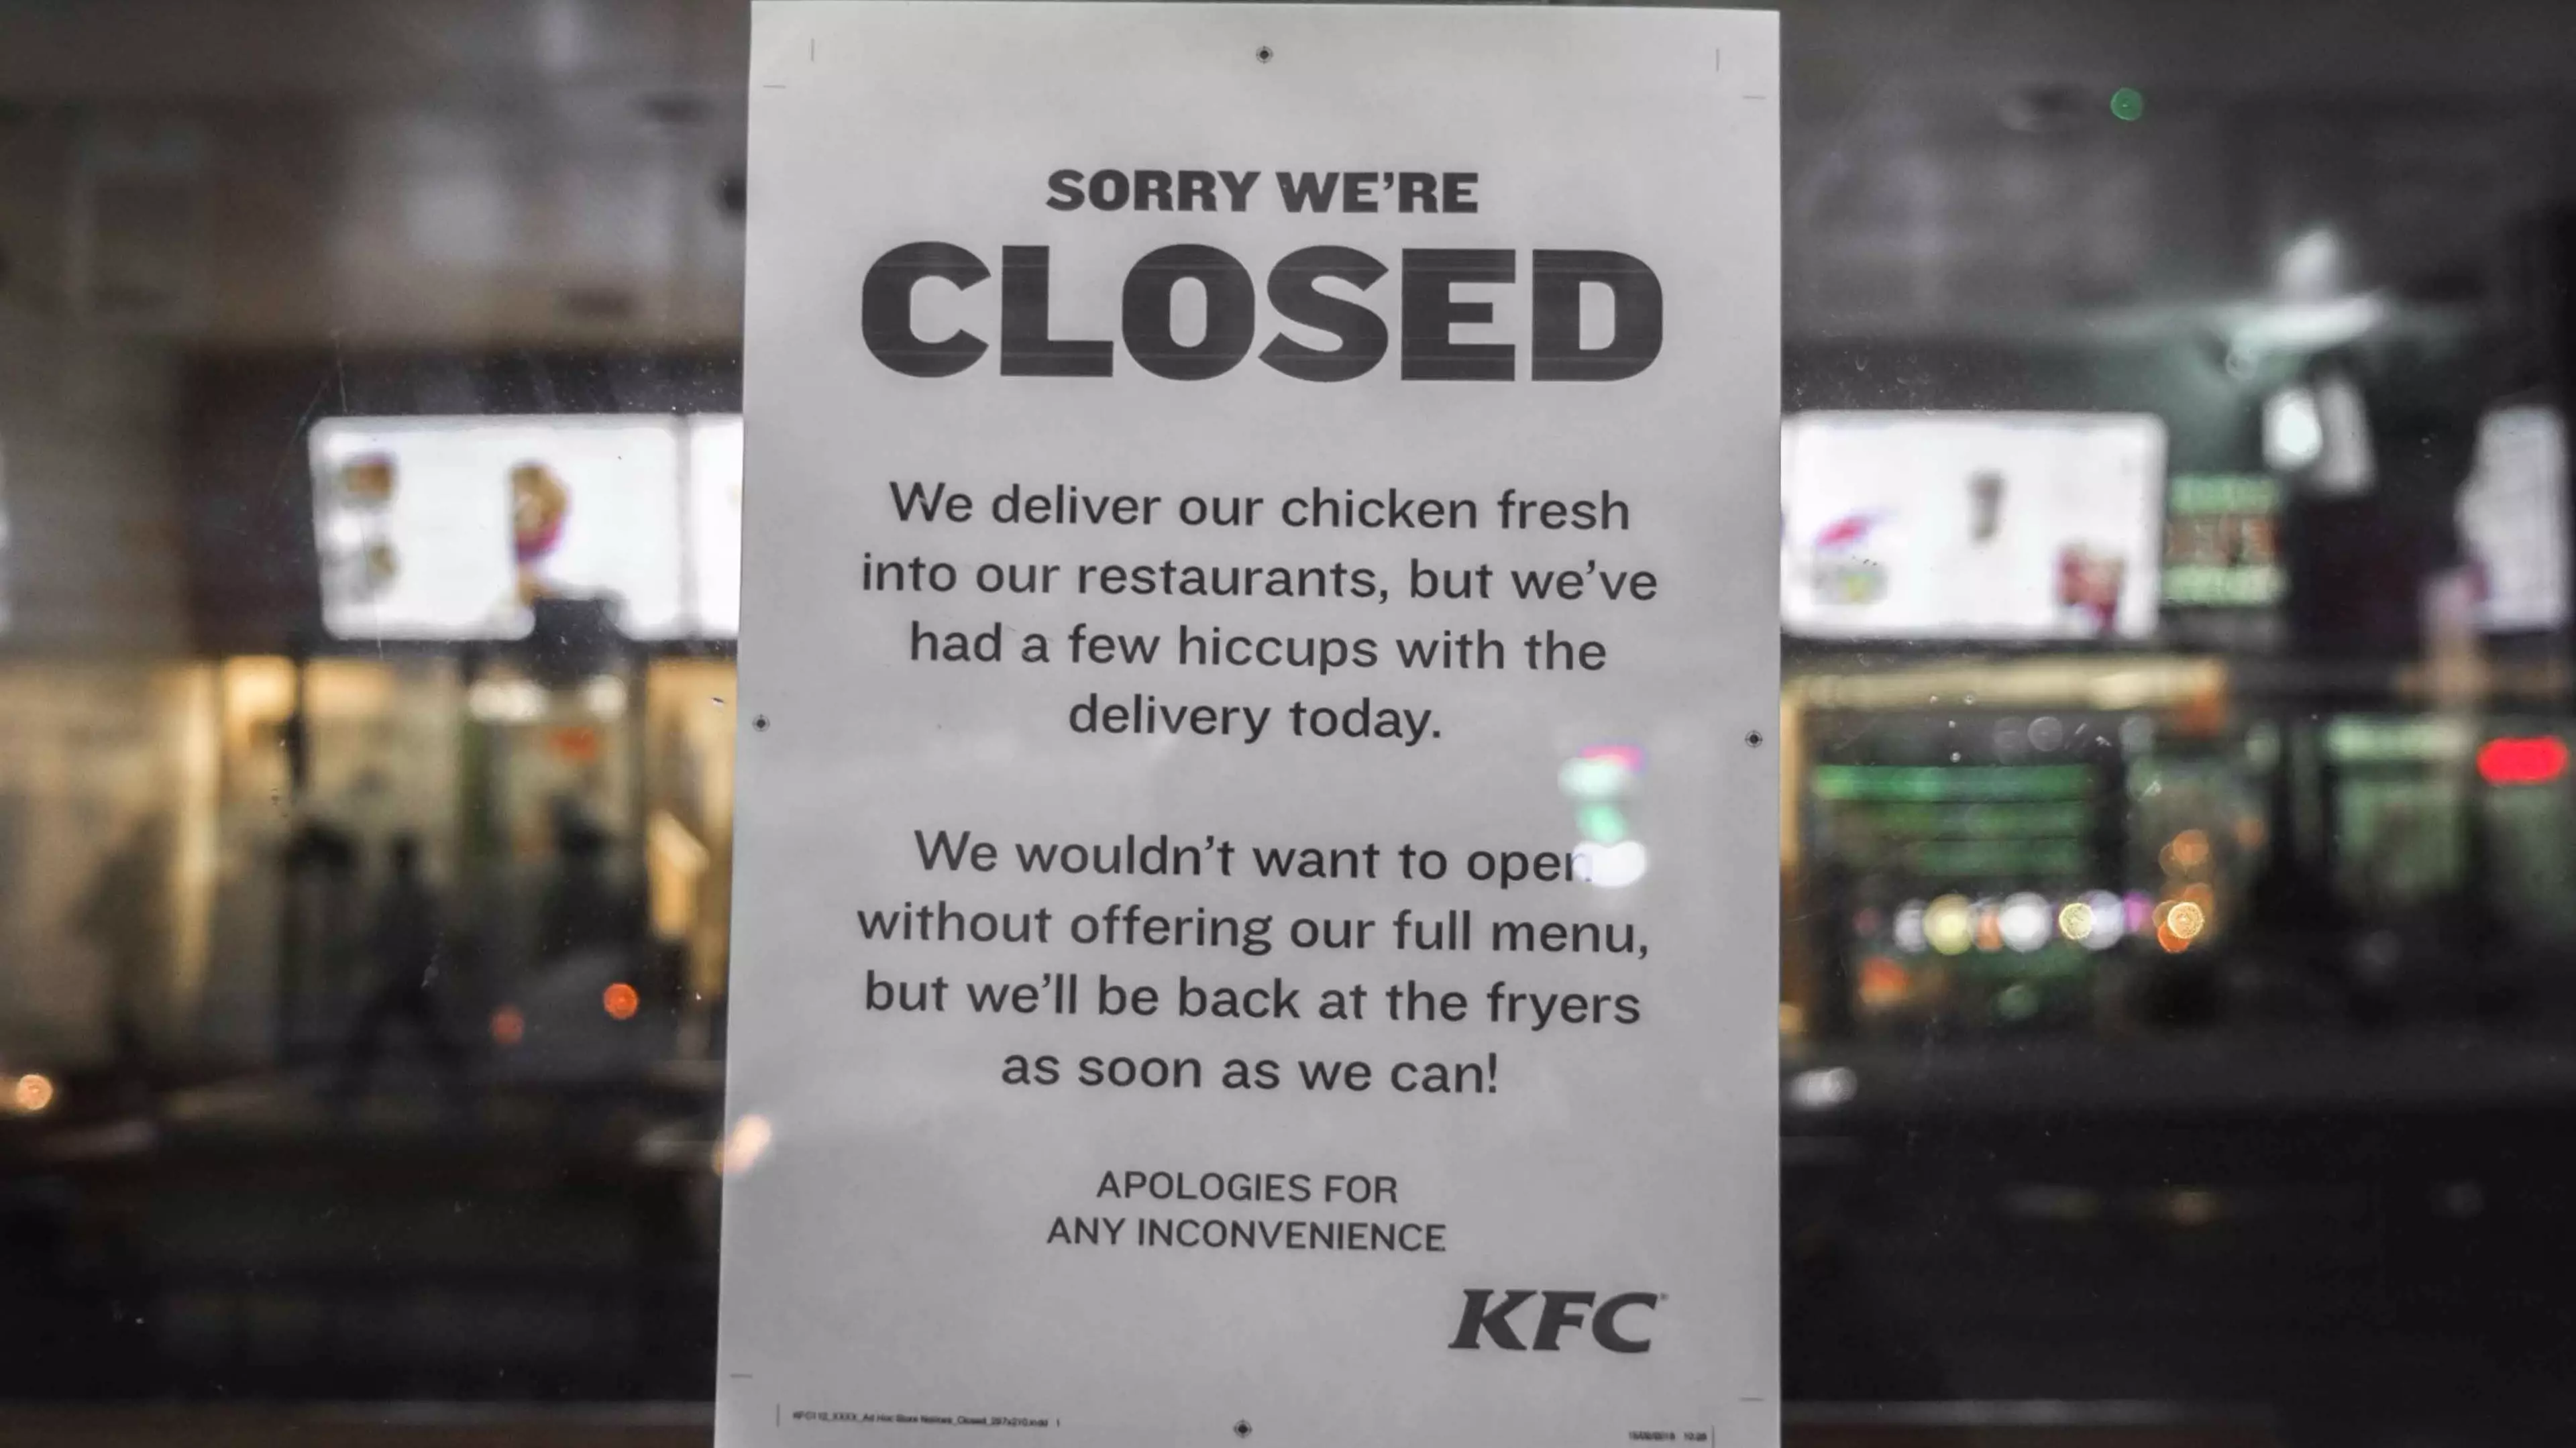 People Are Calling The Police Because KFC Is Out Of Chicken